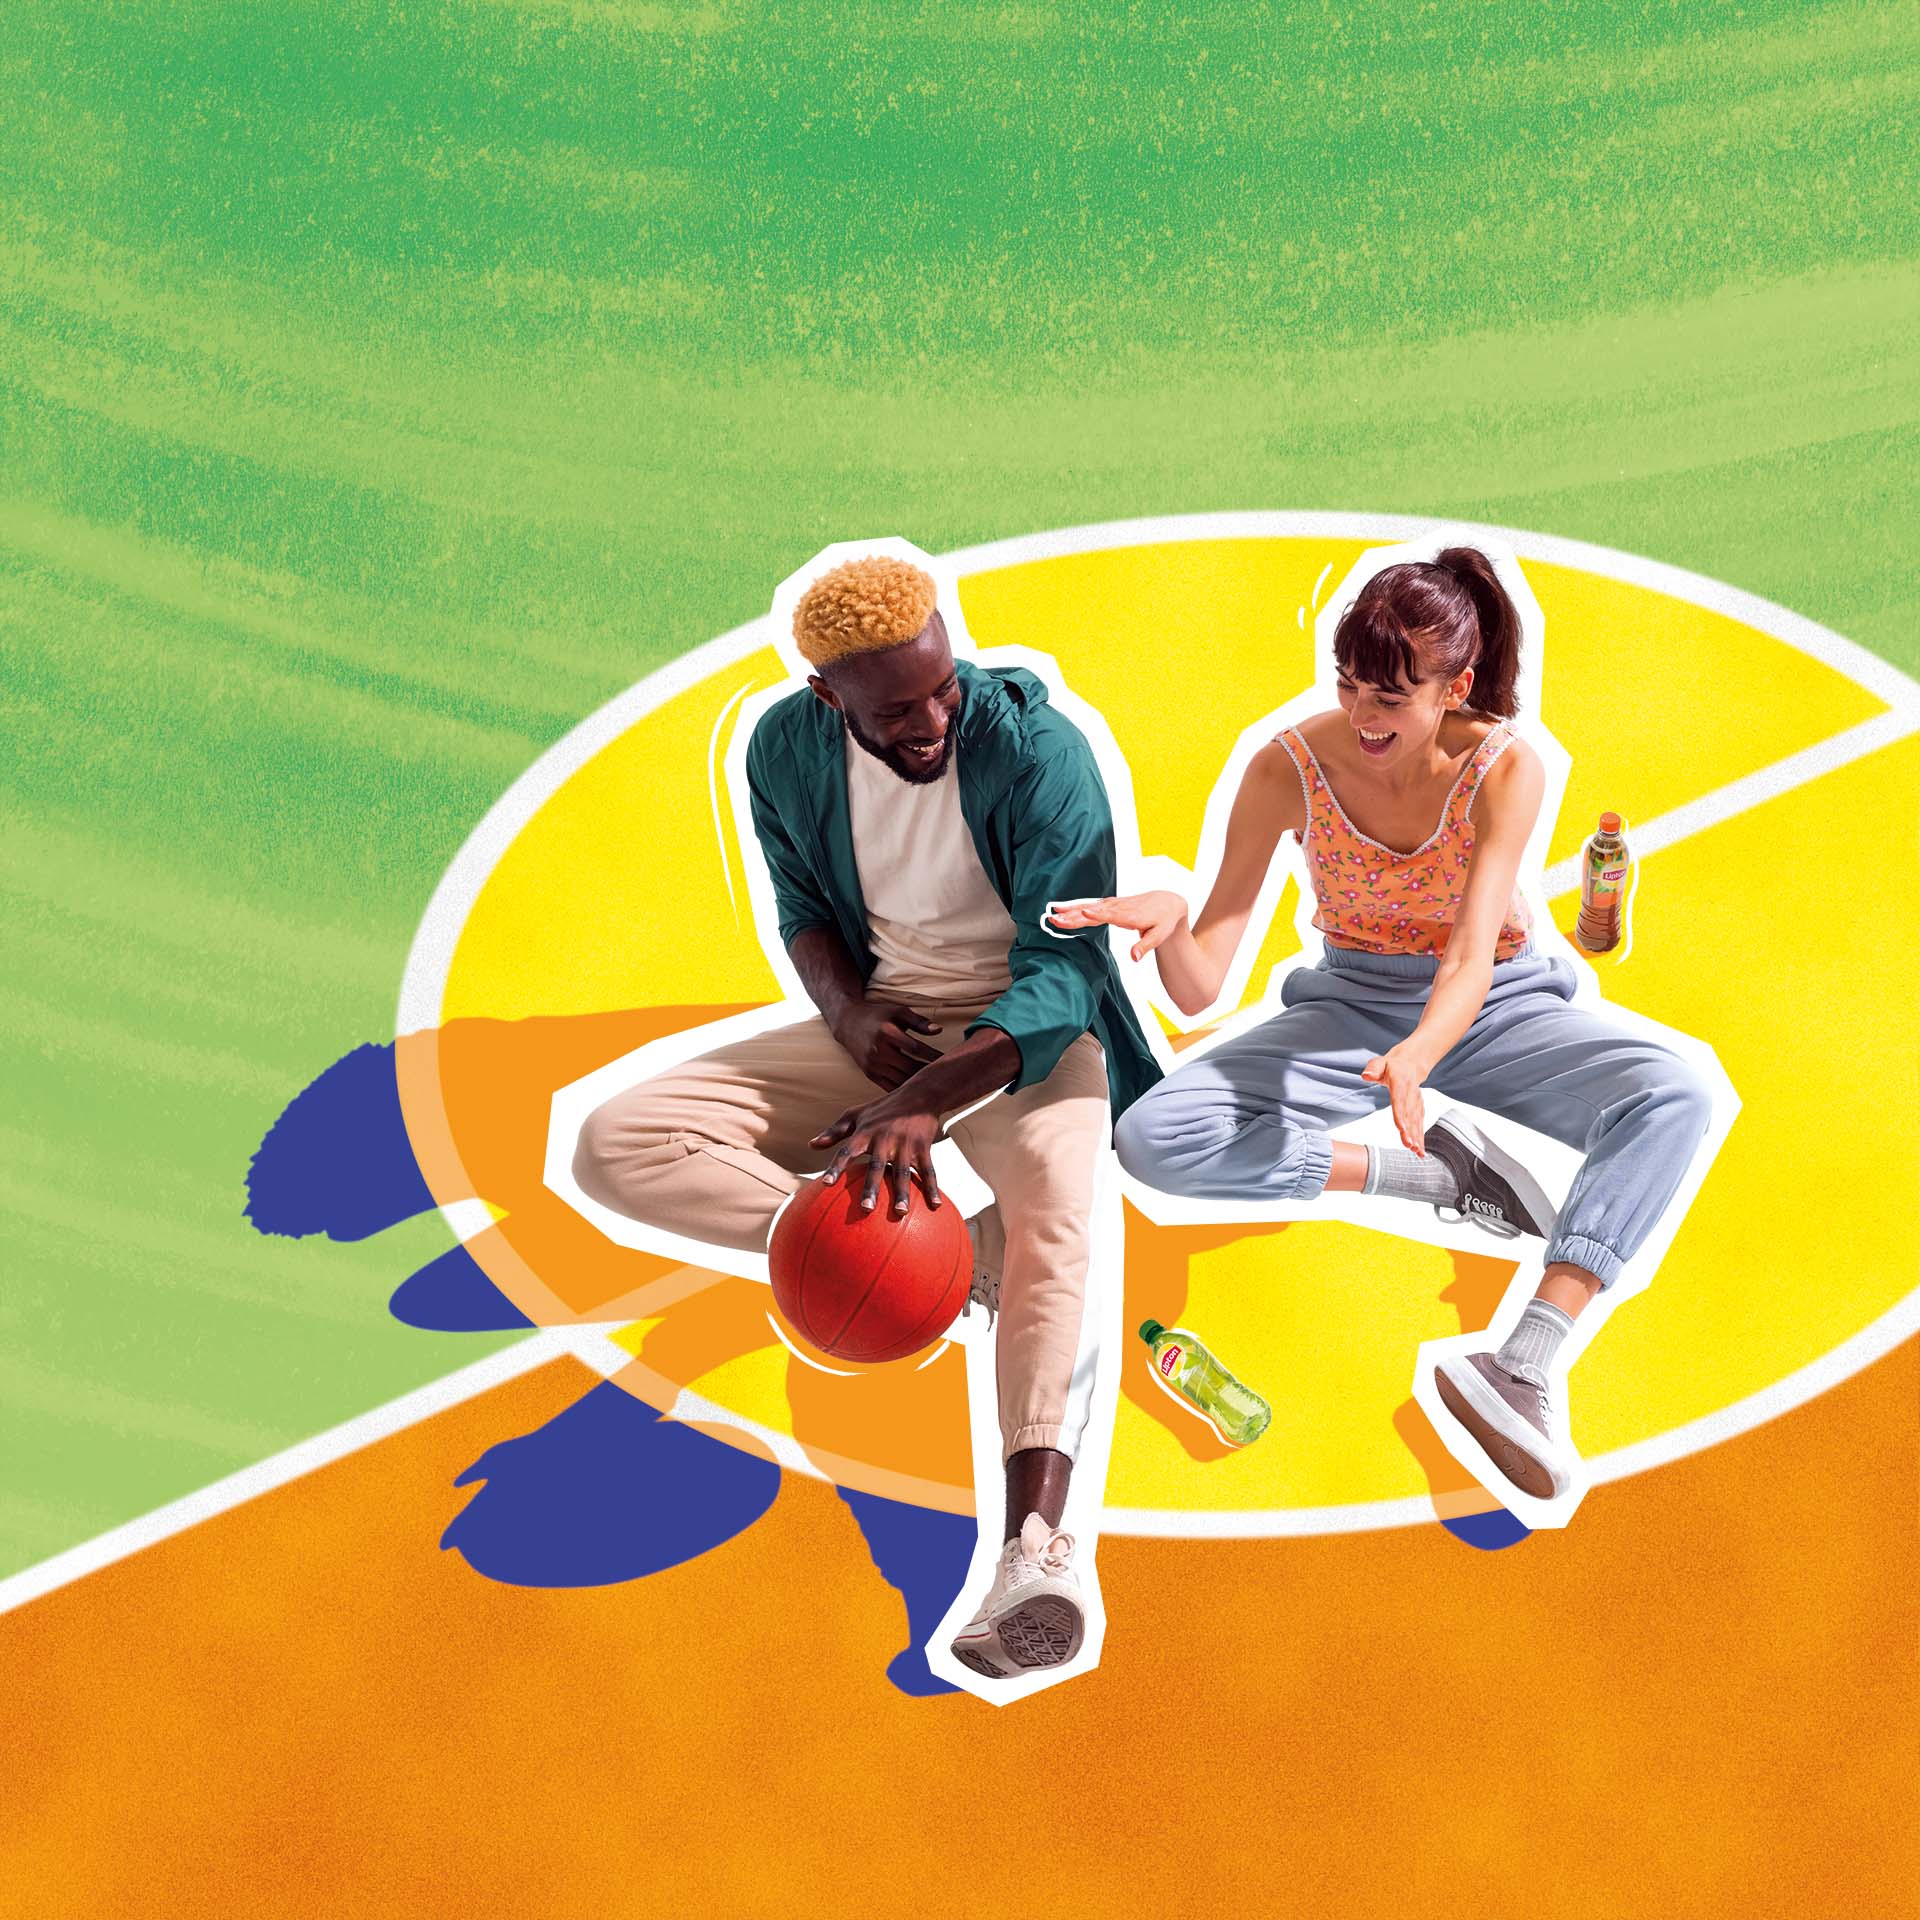 Two people sitting on the floor, with a basketball and two bottles of Lipton Iced Tea in front of a green, yellow and orange background.